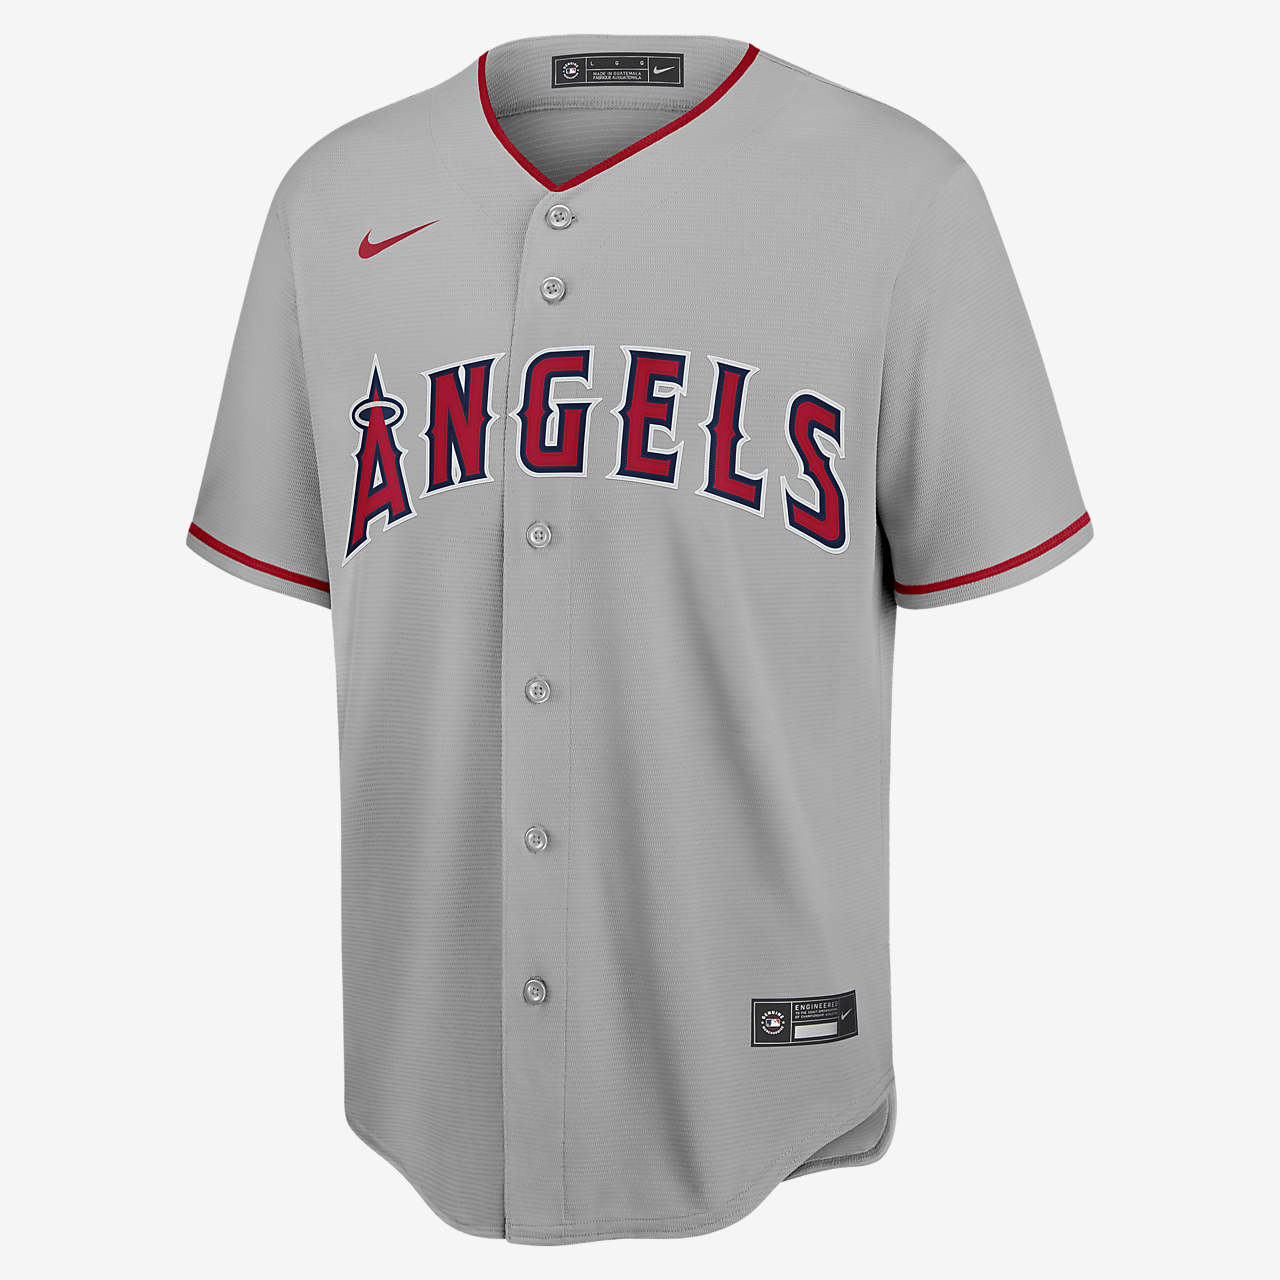 mike trout jersey youth xl